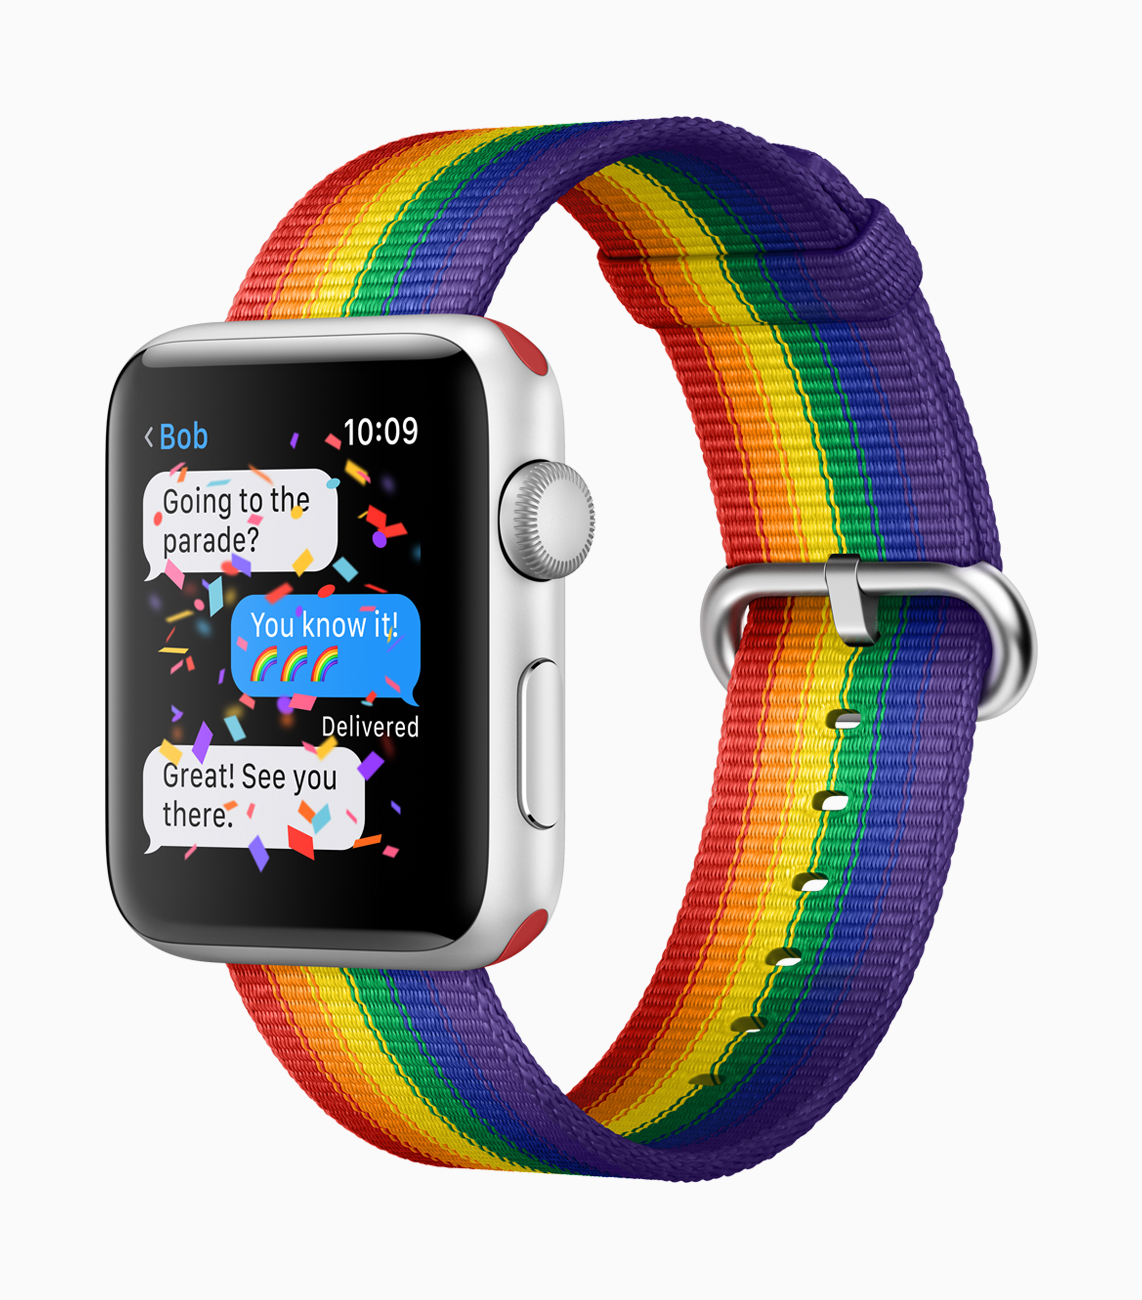 New Apple Watch Bands Including Pride Band Available Now for Summer